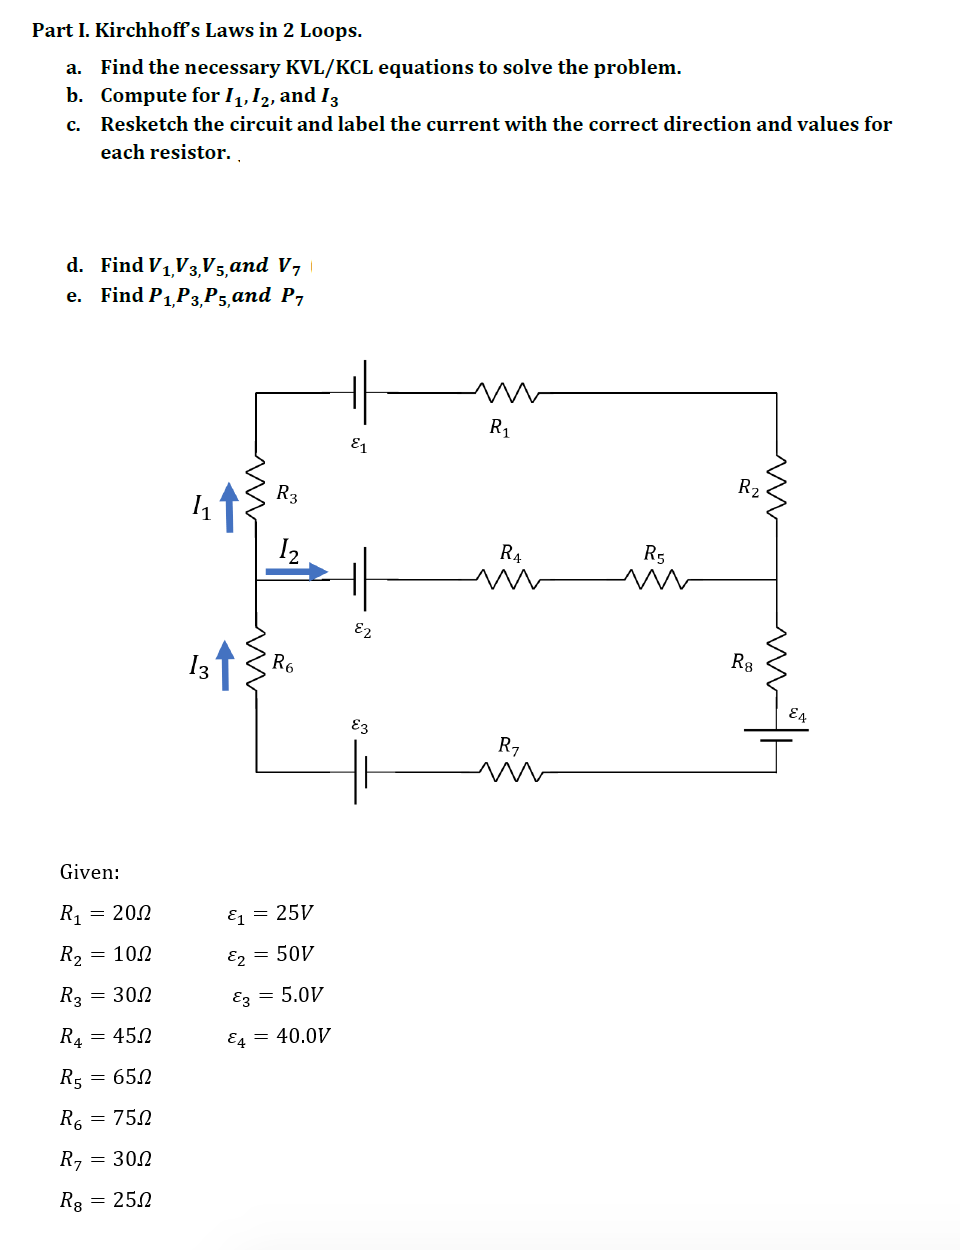 Part I. Kirchhoff's Laws in 2 Loops.
a. Find the necessary KVL/KCL equations to solve the problem.
b.
Compute for 11, 12, and 13
C. Resketch the circuit and label the current with the correct direction and values for
each resistor.
d. Find V₁,V3,V5, and V7
e. Find P₁,P3,P5,and P₁
R₁
Given:
R₁ = 200
R2
= 10.2
R3 = 300
R4 = 450
R5 = 650
R₁ = 750
R₁ = 300
R8 = 250
R3
13↑ {R6
&₁ = 25V
^2 = 50/
E3 = 5.0V
E4 = 40.0V
E1
ㅔ
E2
E3
R₁
m
R₁
R5
m
R₂
m
R8
ww
Wh
EA